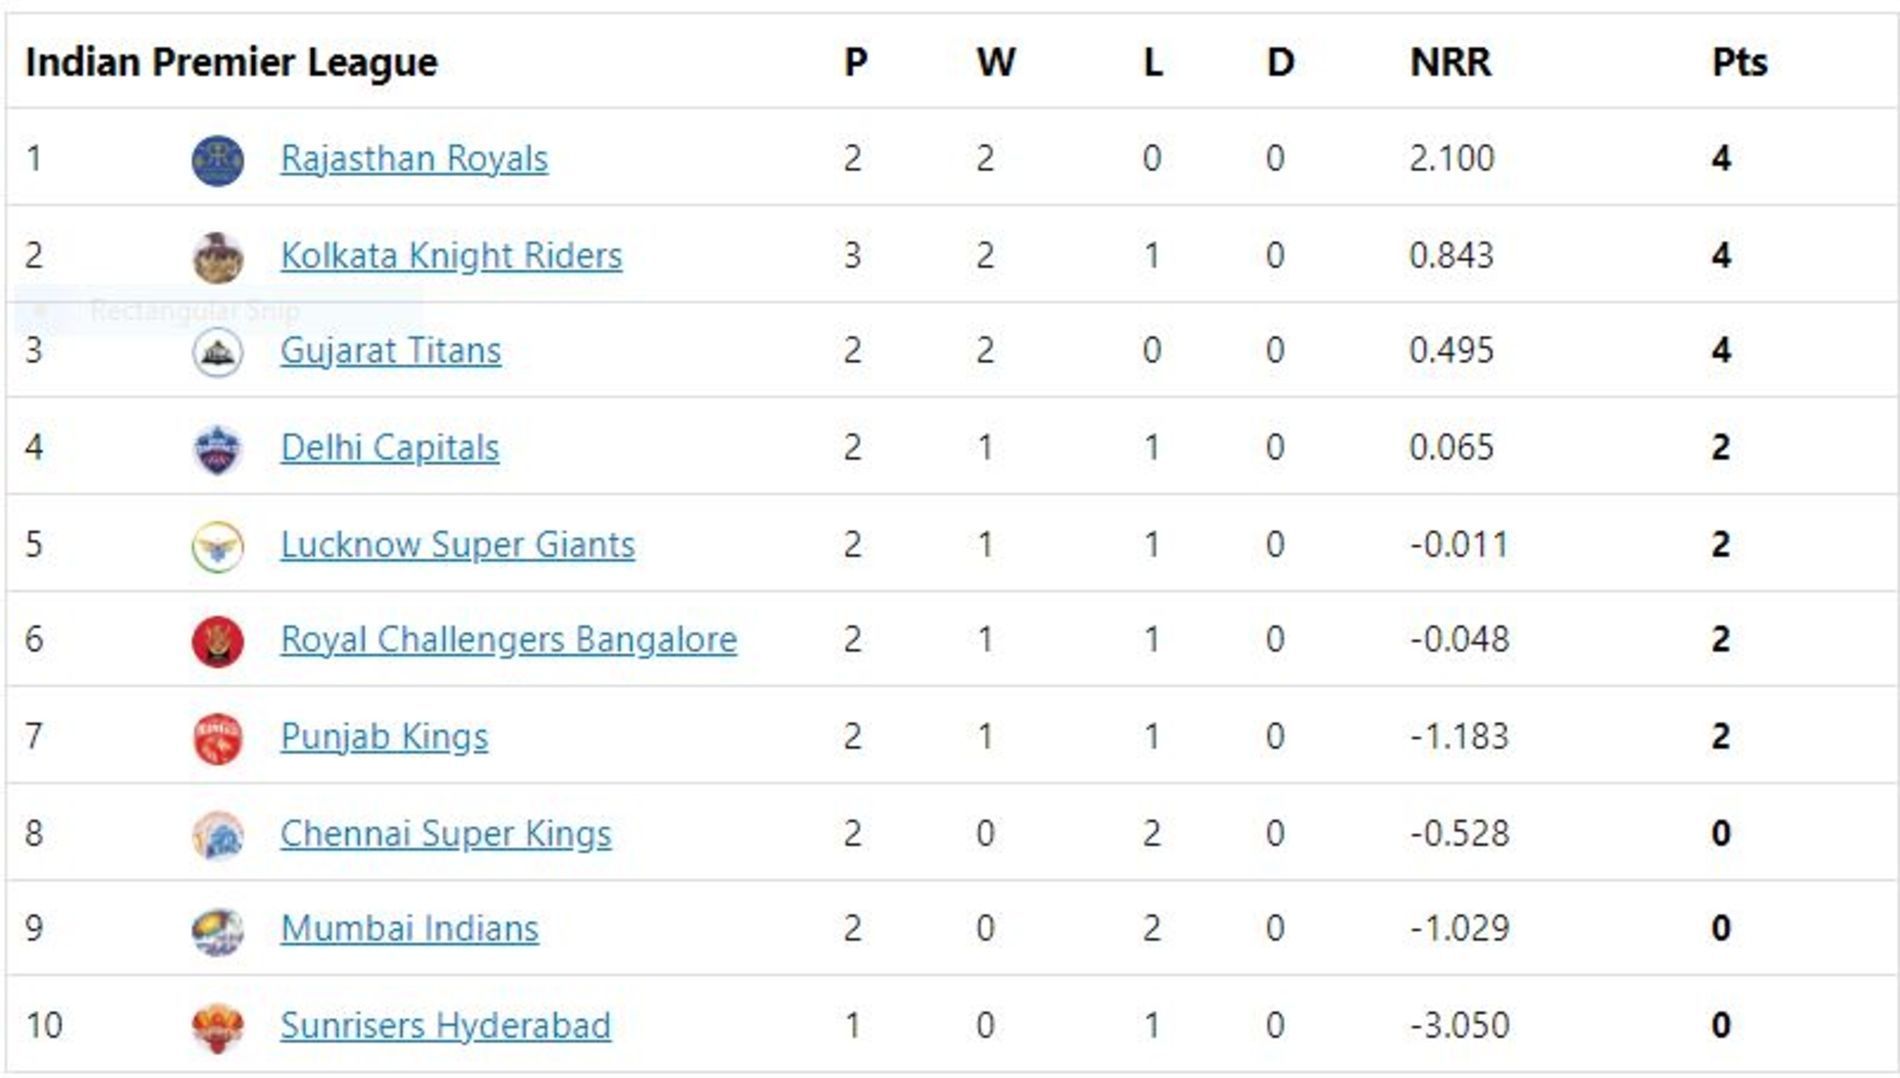 Gujarat Titans move to third position in the points table